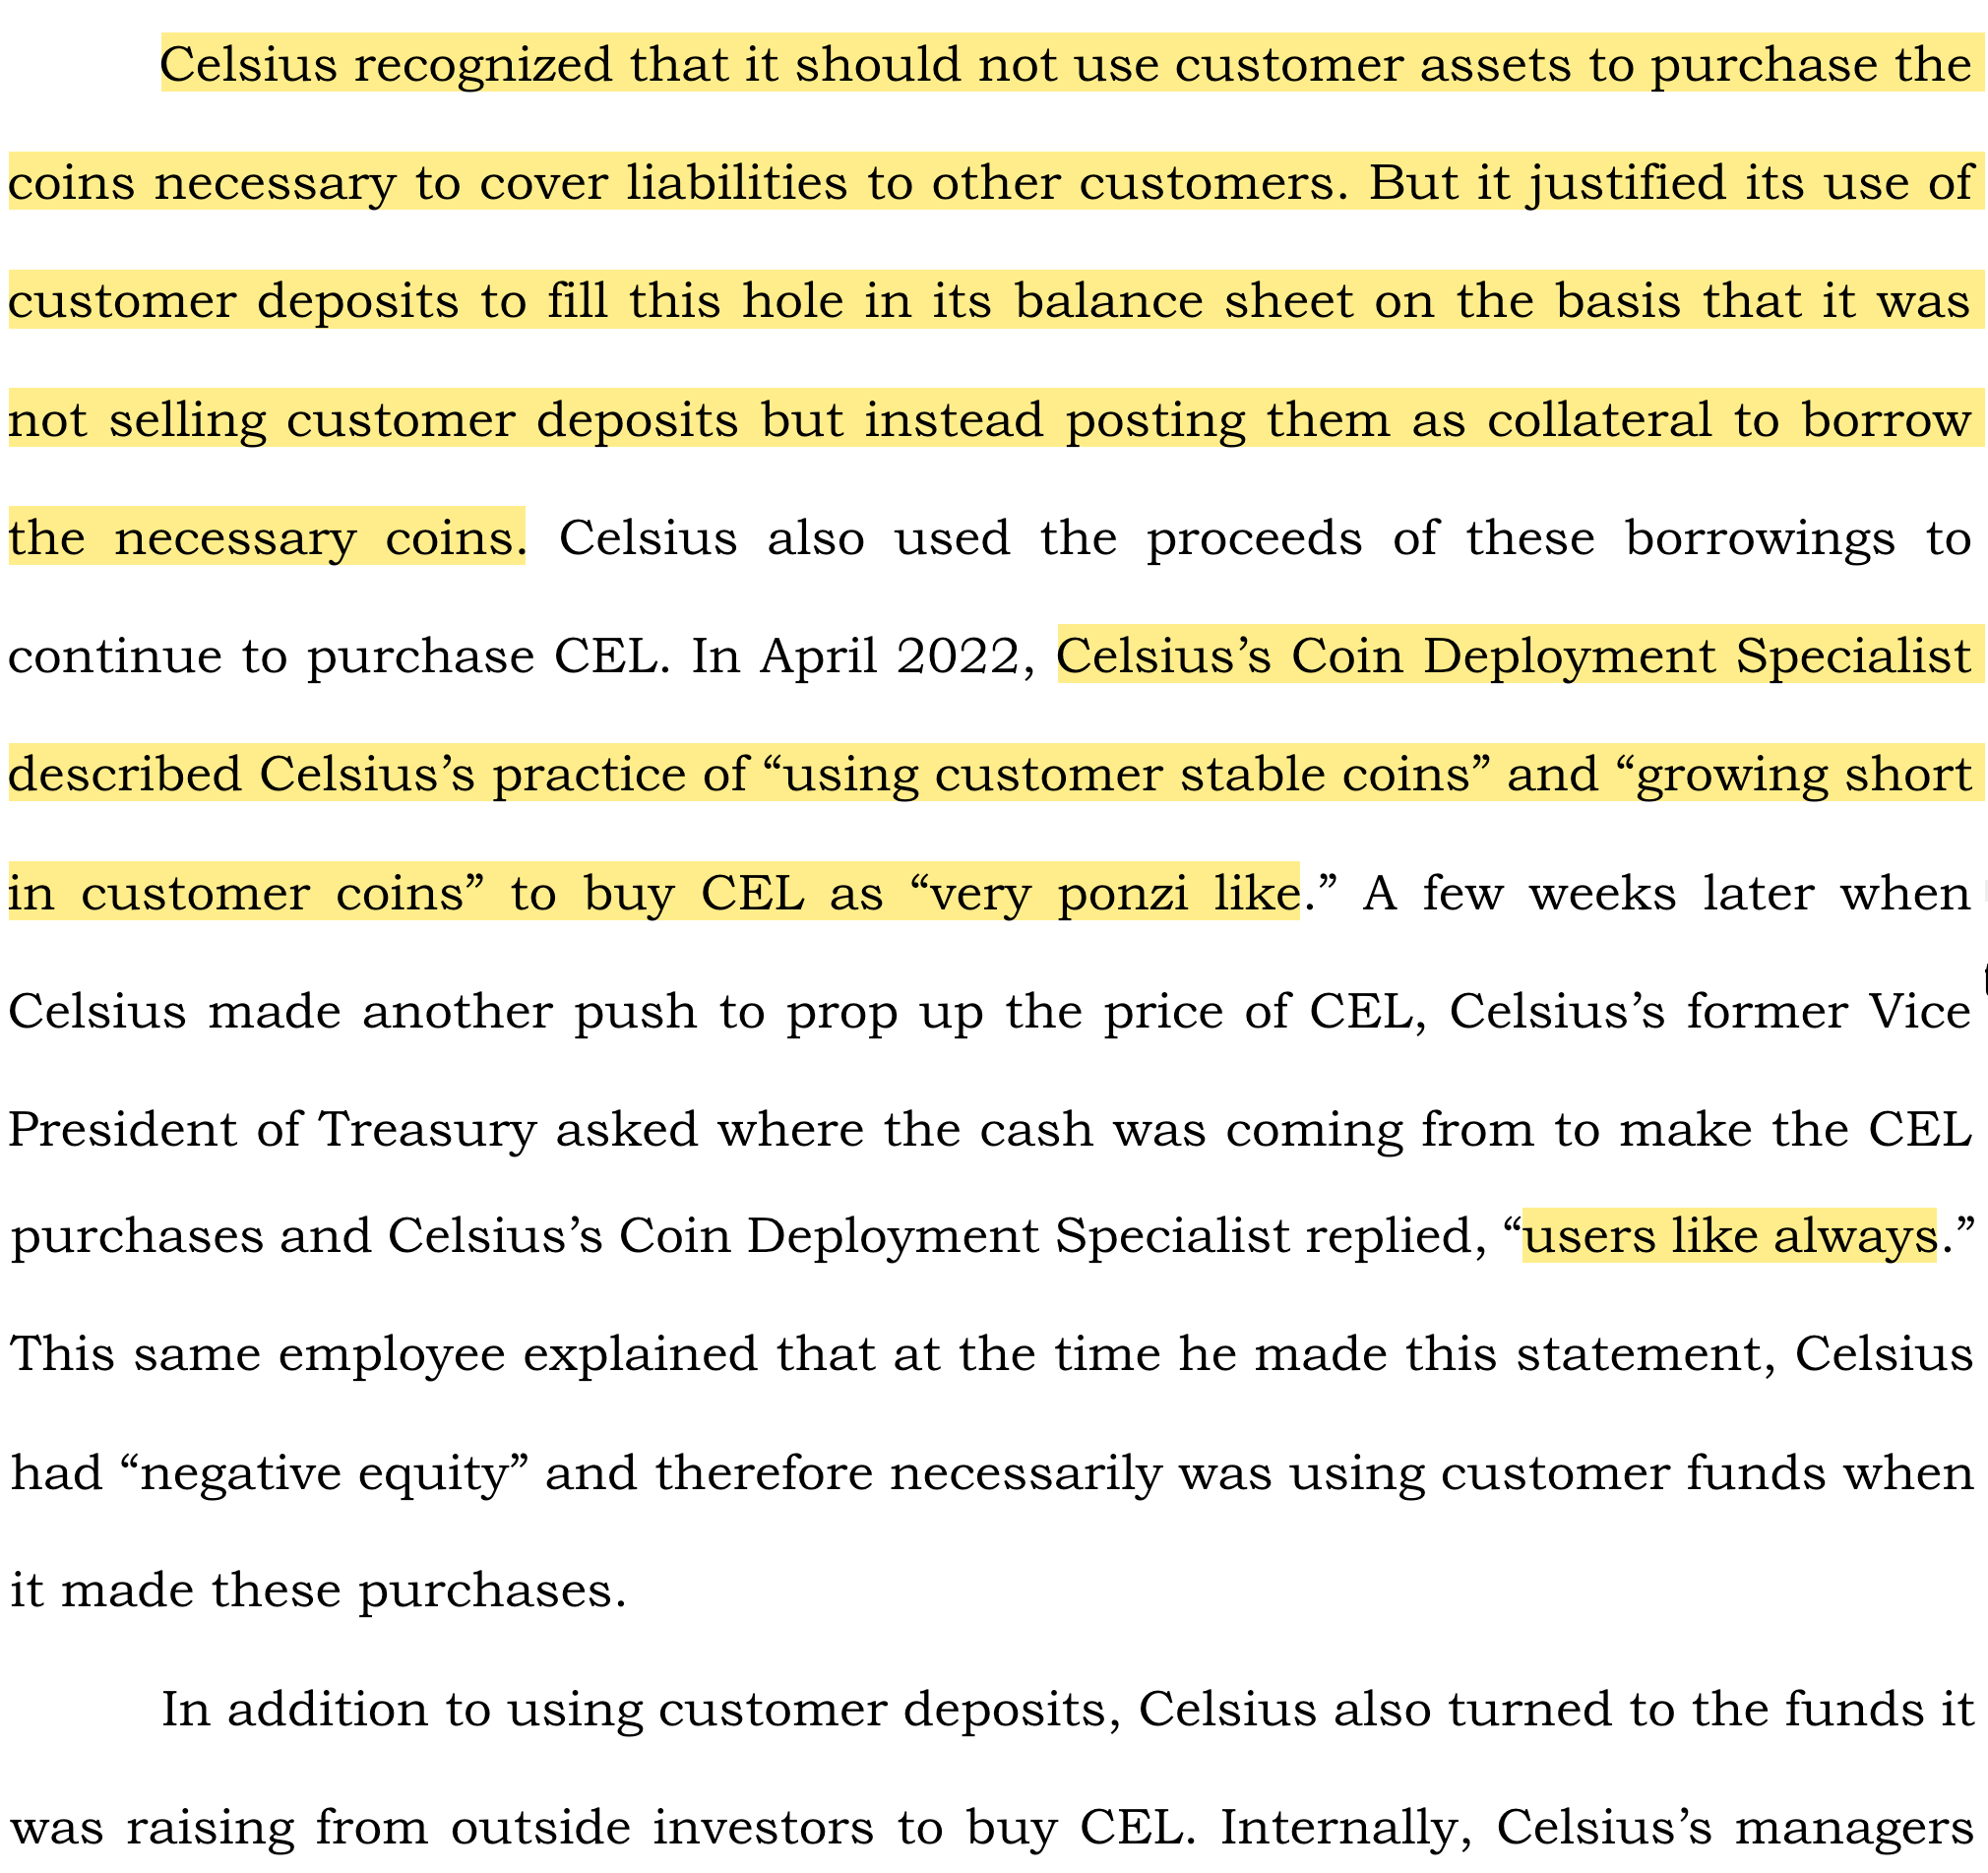 Celsius recognized that it should not use customer assets to purchase the coins necessary to cover liabilities to other customers. But it justified its use of customer deposits to fill this hole in its balance sheet on the basis that it was not selling customer deposits but instead posting them as collateral to borrow the necessary coins. Celsius also used the proceeds of these borrowings to continue to purchase CEL. In April 2022, Celsius's Coin Deployment Specialist described Celsius's practice of 